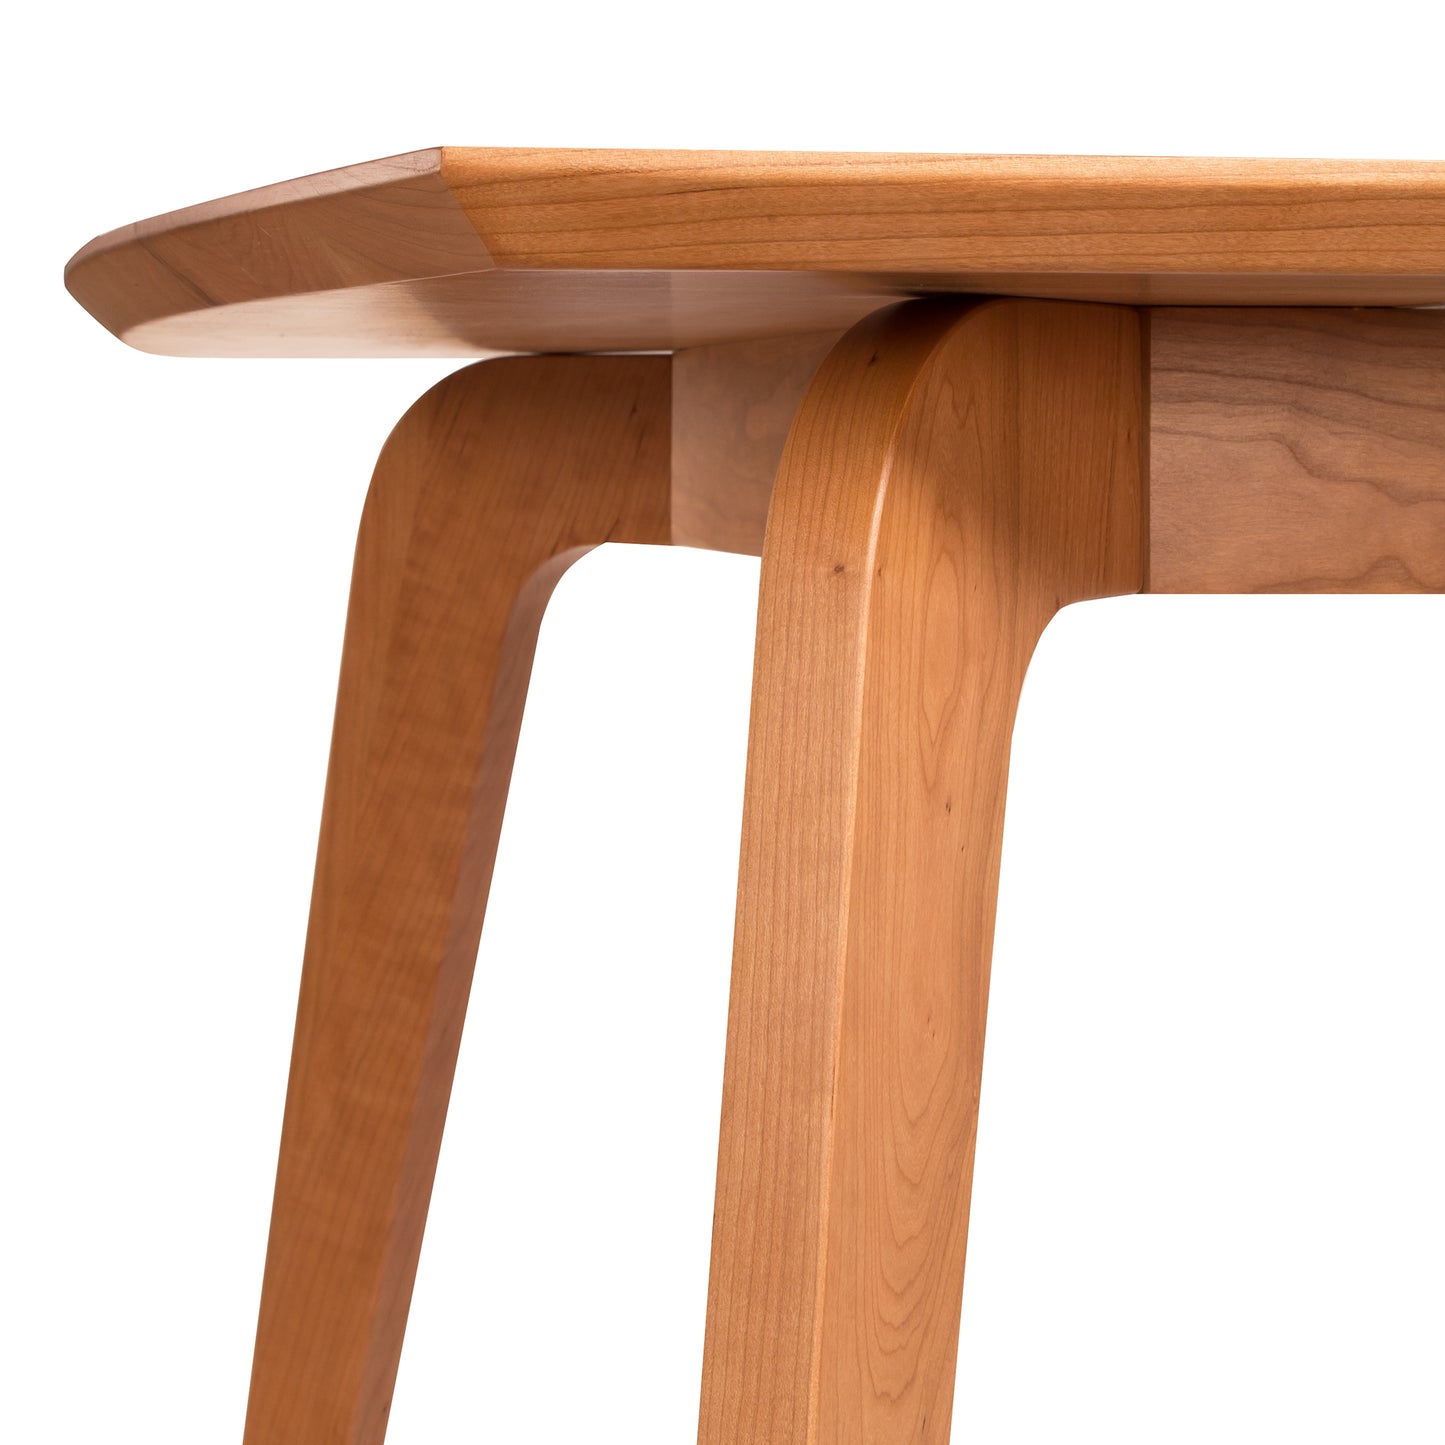 A wooden dining table with two legs.